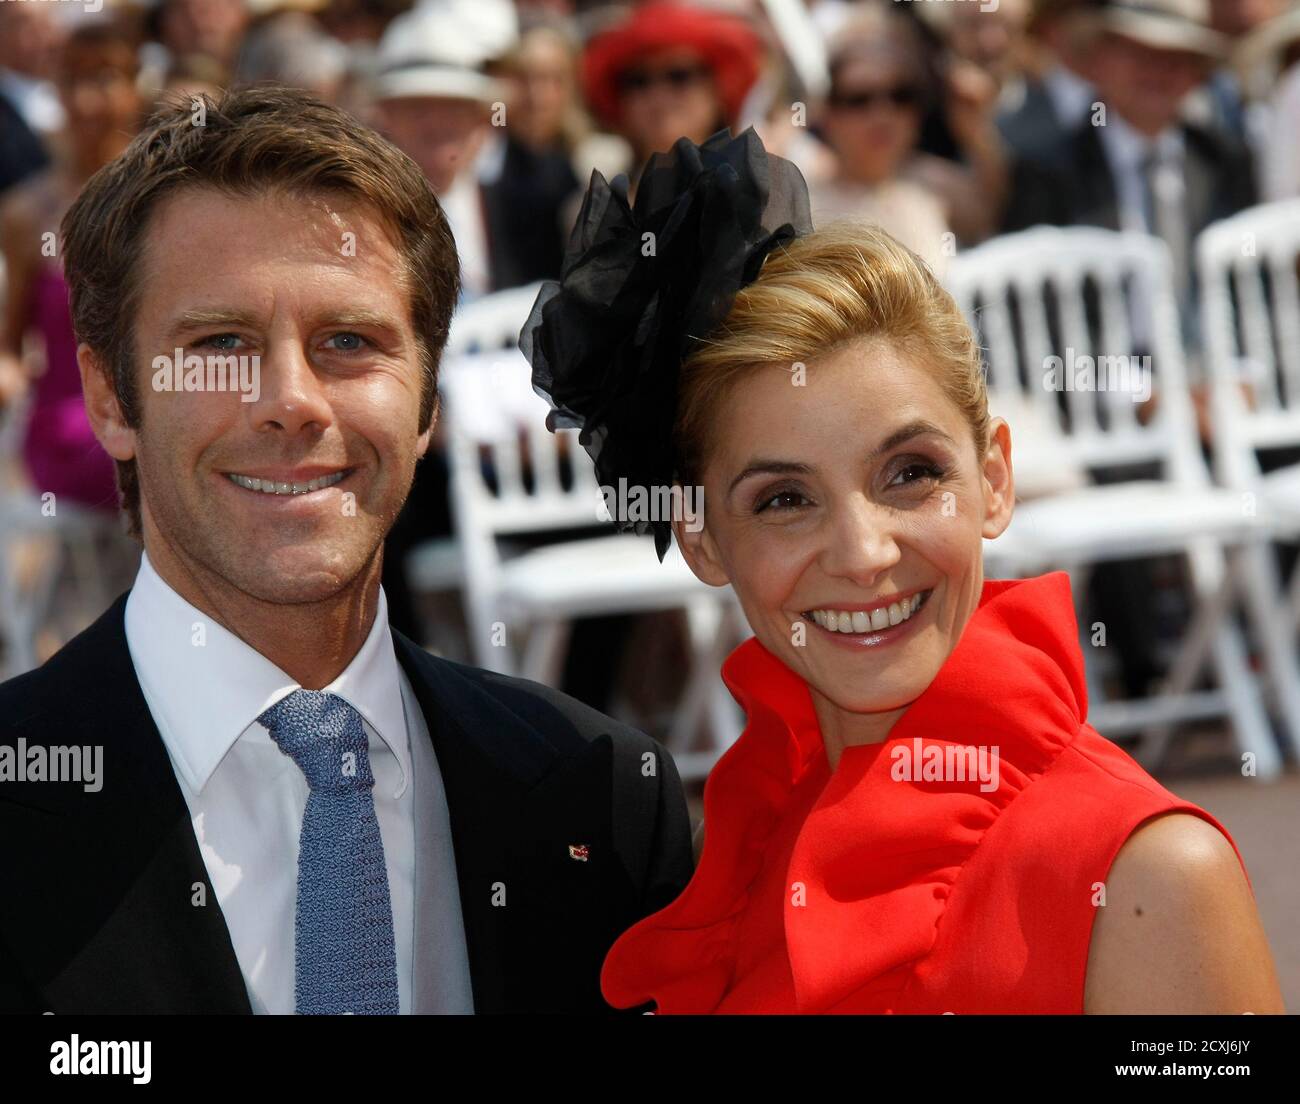 prince-emanuele-filiberto-of-savoy-l-and-his-wife-french-actress-clotilde-courau-arrive-at-the-place-du-palais-to-attend-the-religious-wedding-ceremony-for-monacos-prince-albert-ii-and-princess-charlene-at-the-palace-in-monaco-july-2-2011-reutersmichel-spinglerpool-monaco-tags-royals-entertainment-monaco-royal-wedding-2CXJ6JY.jpg